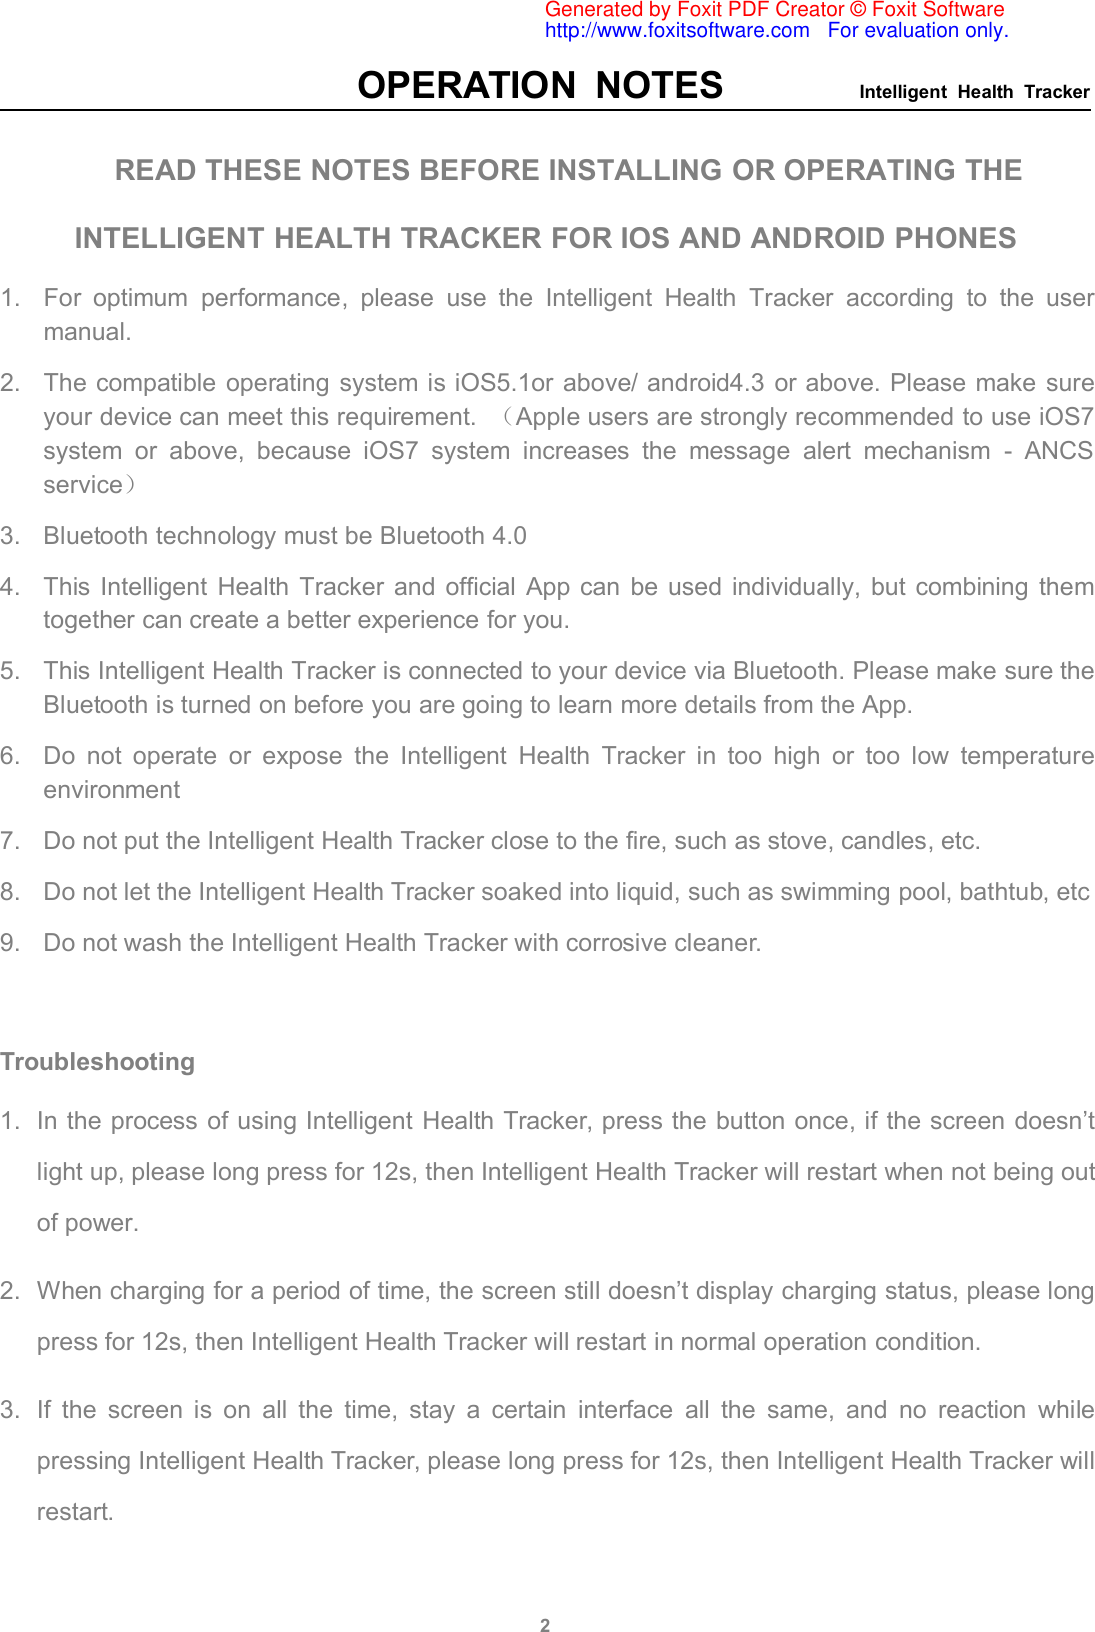 OPERATION NOTES Intelligent Health Tracker2READ THESE NOTES BEFORE INSTALLING OR OPERATING THEINTELLIGENT HEALTH TRACKER FOR IOS AND ANDROID PHONES1. For optimum performance, please use the Intelligent Health Tracker according to the usermanual.2. The compatible operating system is iOS5.1or above/ android4.3 or above. Please make sureyour device can meet this requirement. （Apple users are strongly recommended to use iOS7system or above, because iOS7 system increases the message alert mechanism - ANCSservice）3. Bluetooth technology must be Bluetooth 4.04. This Intelligent Health Tracker and official App can be used individually, but combining themtogether can create a better experience for you.5. This Intelligent Health Tracker is connected to your device via Bluetooth. Please make sure theBluetooth is turned on before you are going to learn more details from the App.6. Do not operate or expose the Intelligent Health Tracker in too high or too low temperatureenvironment7. Do not put the Intelligent Health Tracker close to the fire, such as stove, candles, etc.8. Do not let the Intelligent Health Tracker soaked into liquid, such as swimming pool, bathtub, etc9. Do not wash the Intelligent Health Tracker with corrosive cleaner.Troubleshooting1. In the process of using Intelligent Health Tracker, press the button once, if the screen doesn’tlight up, please long press for 12s, then Intelligent Health Tracker will restart when not being outof power.2. When charging for a period of time, the screen still doesn’t display charging status, please longpress for 12s, then Intelligent Health Tracker will restart in normal operation condition.3. If the screen is on all the time, stay a certain interface all the same, and no reaction whilepressing Intelligent Health Tracker, please long press for 12s, then Intelligent Health Tracker willrestart.Generated by Foxit PDF Creator © Foxit Softwarehttp://www.foxitsoftware.com   For evaluation only.